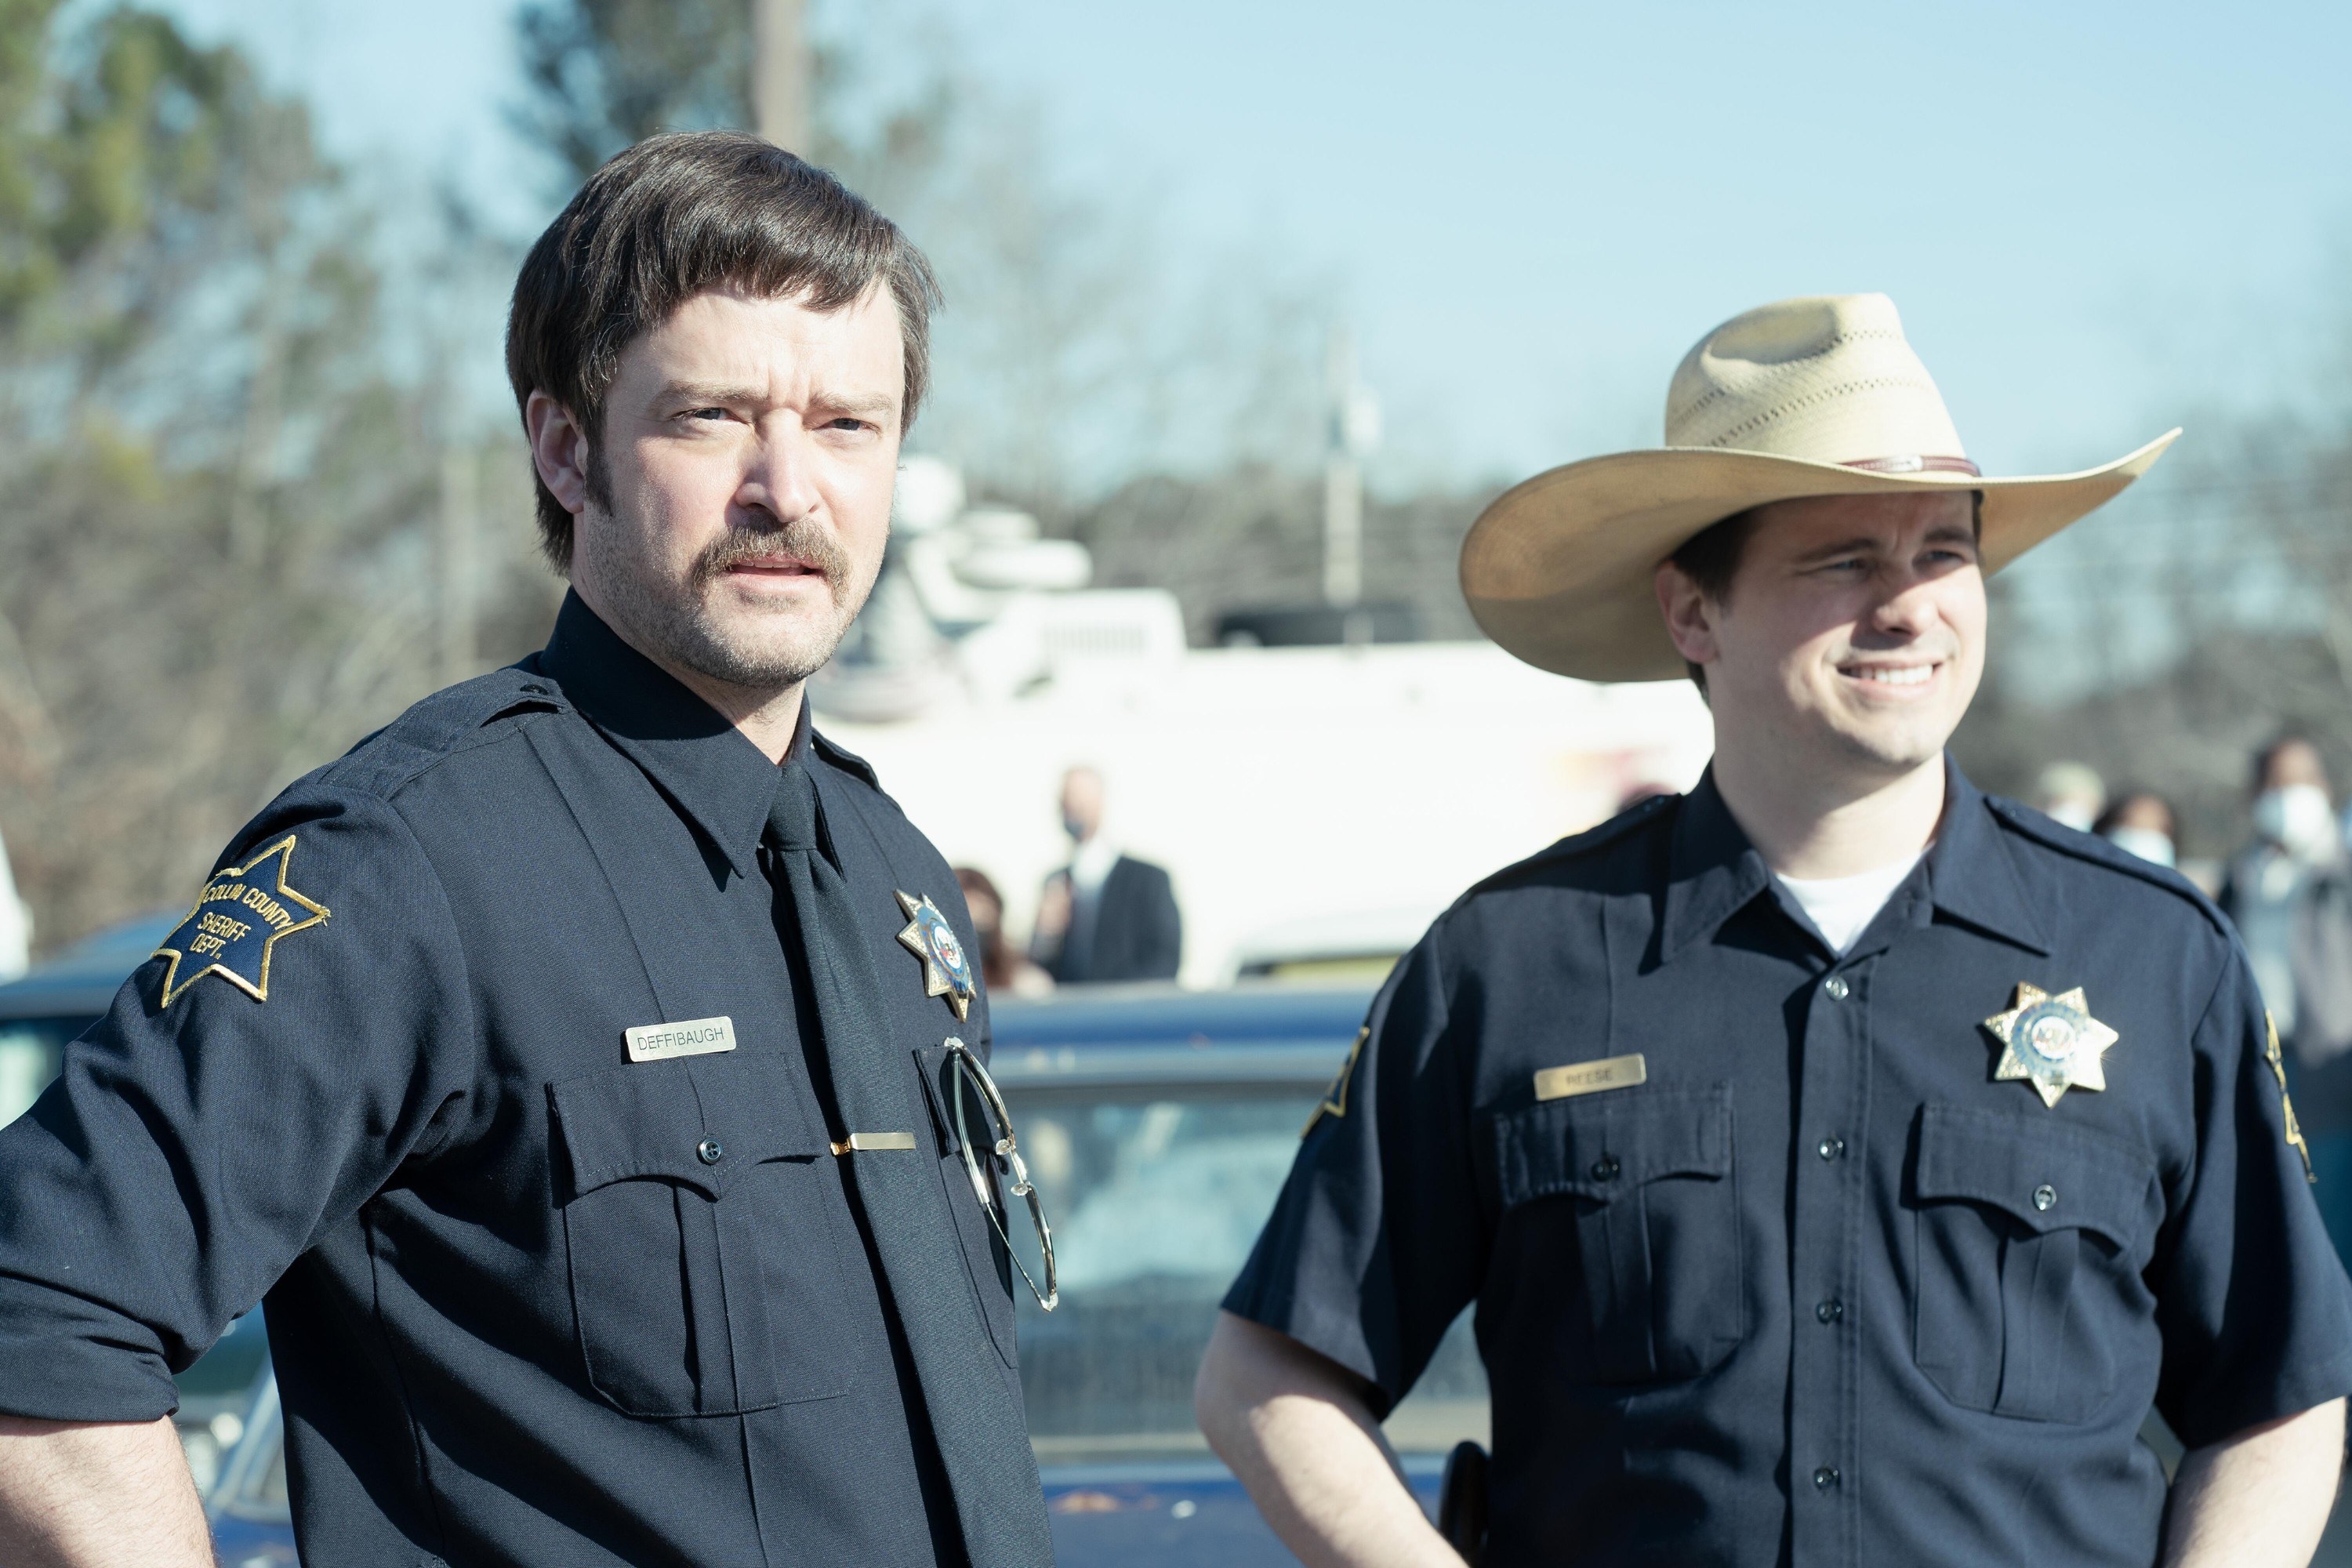 Justin and Jason in police uniforms, Justin with a moustache and Jason wearing a cowboy hat